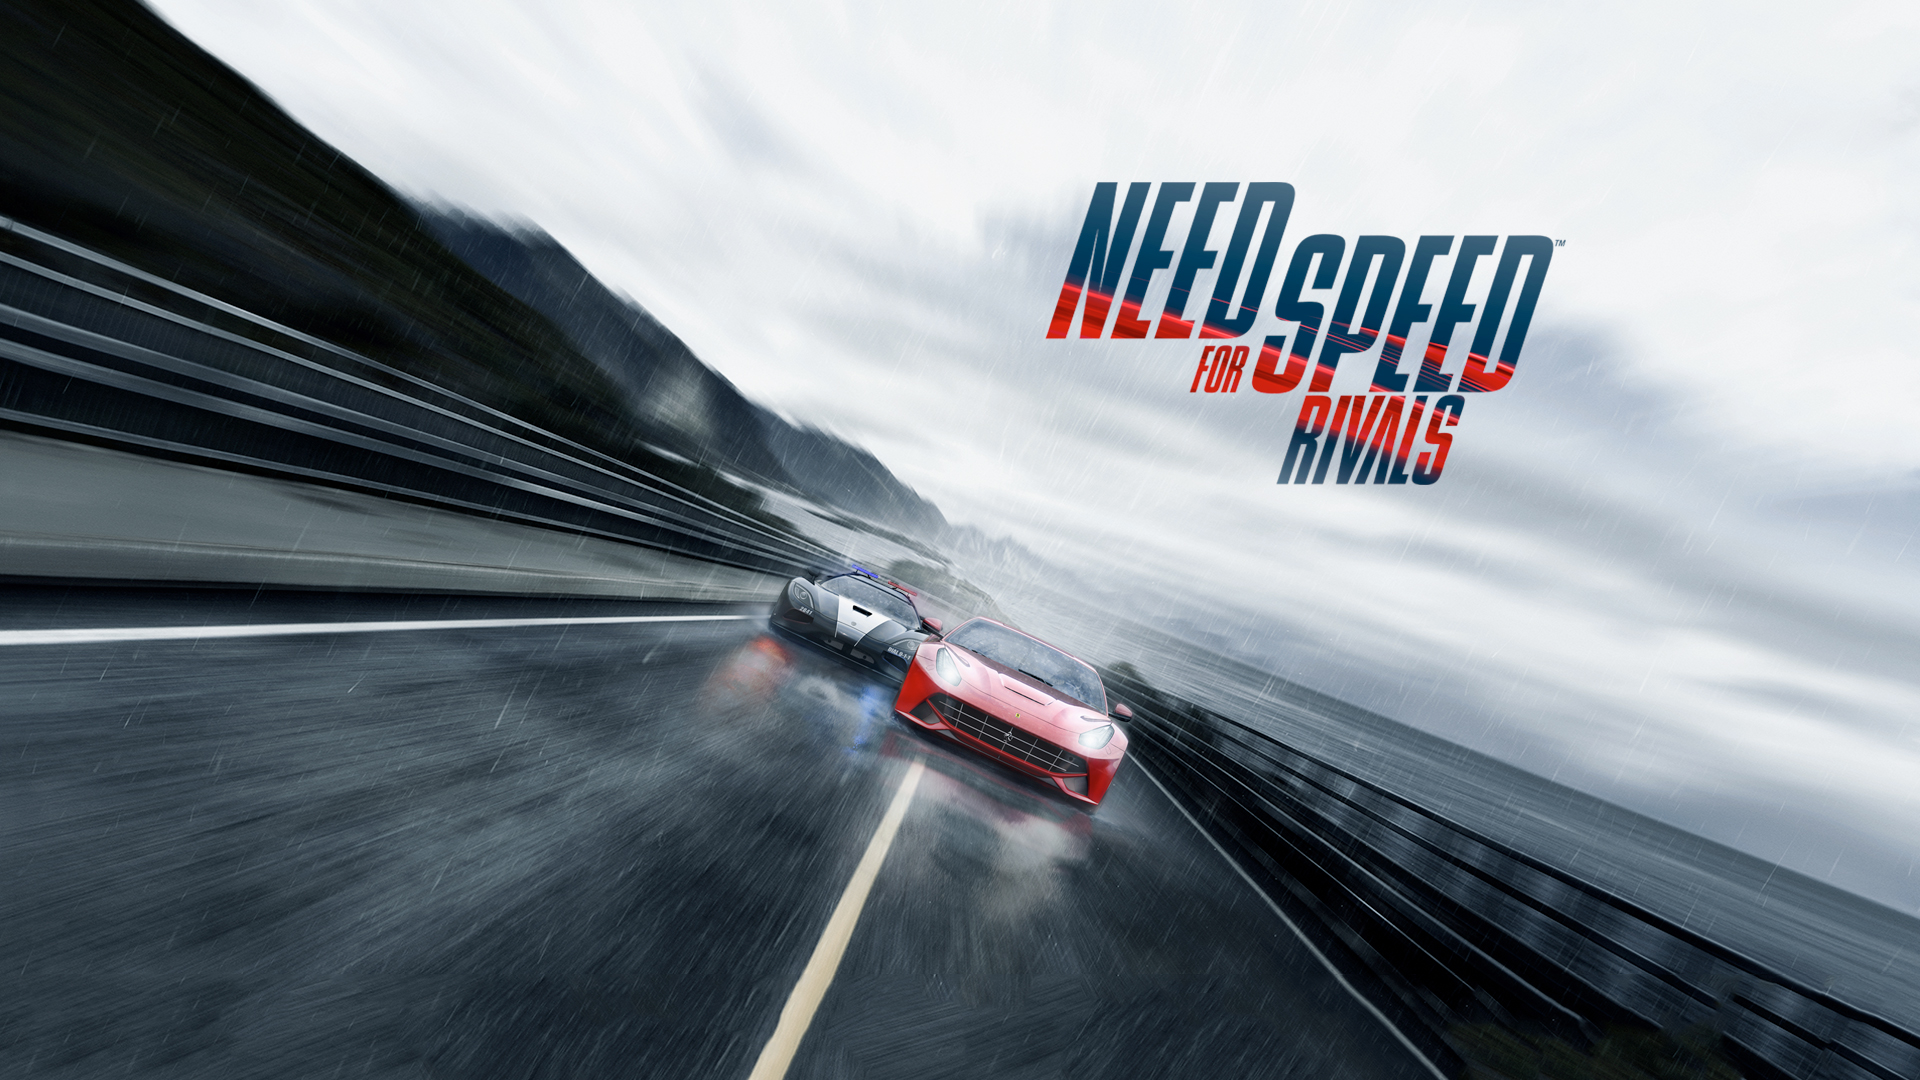 Need for speed rivals download for pc highly compressed only in 3.06 GB